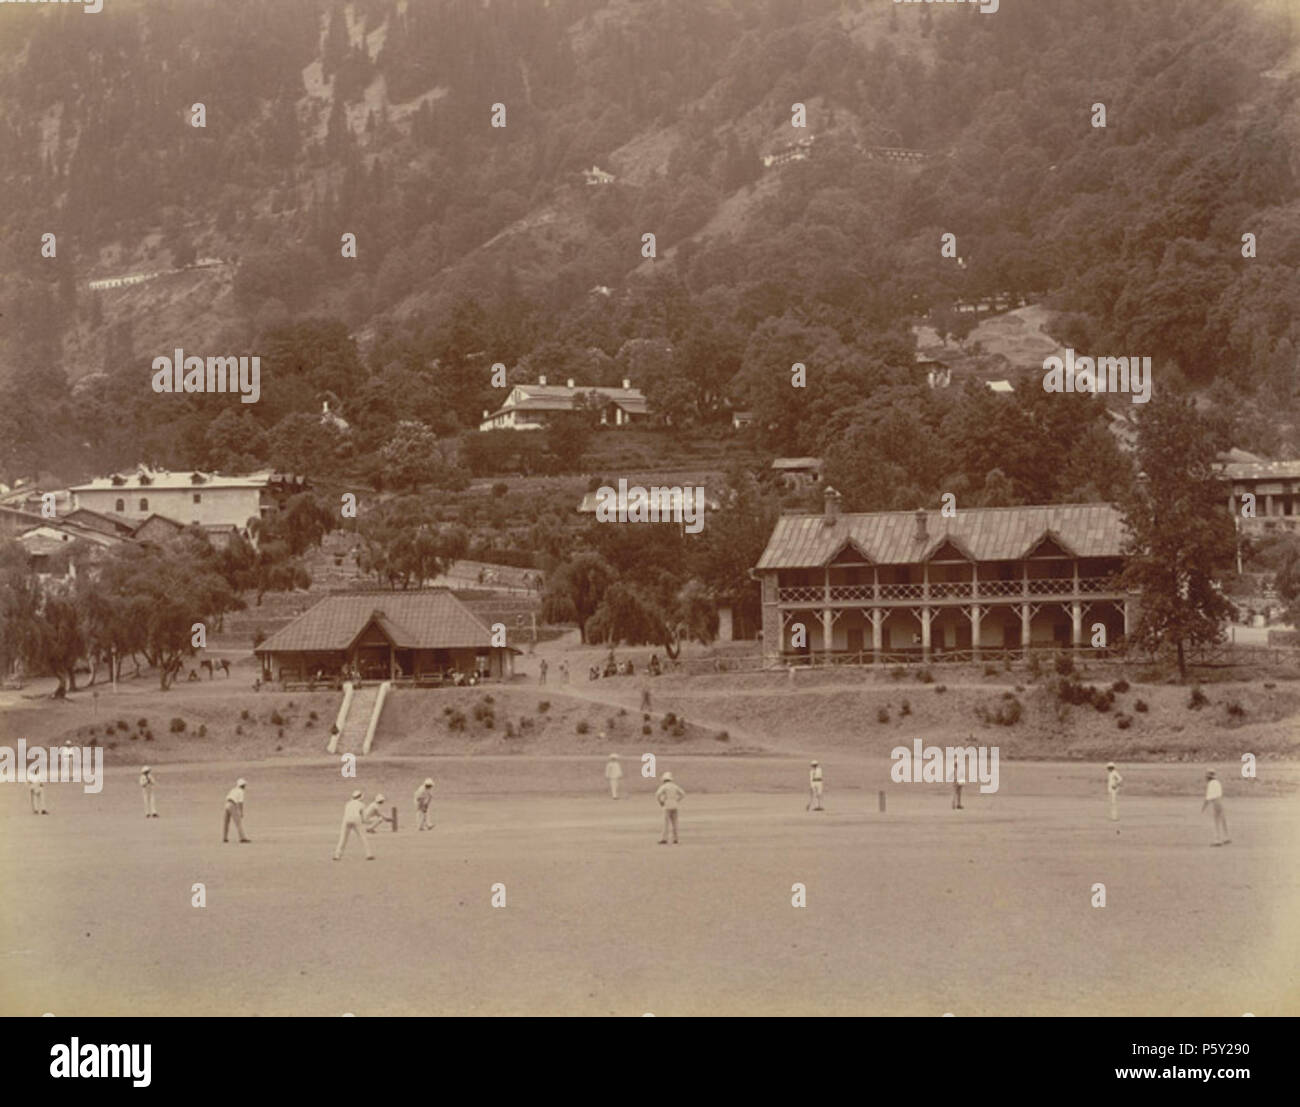 N/A. English: Photograph of a Cricket Match at Nainital from the Macnabb Collection (Col James Henry Erskine Reid): Album of views of 'Naini Tal' taken by Lawrie & Company in 1899. The area of the Kumaon Hills had come under British rule after the Anglo-Nepal War (1814-16) but it wasn't until 1841 that P. Barron built the first European house in Nainital. The town became the summer headquarters of the colonial administration of the province. It was a popular retreat for the residents of the plains. Being popular with the British, the town developed a British character with several European sch Stock Photo